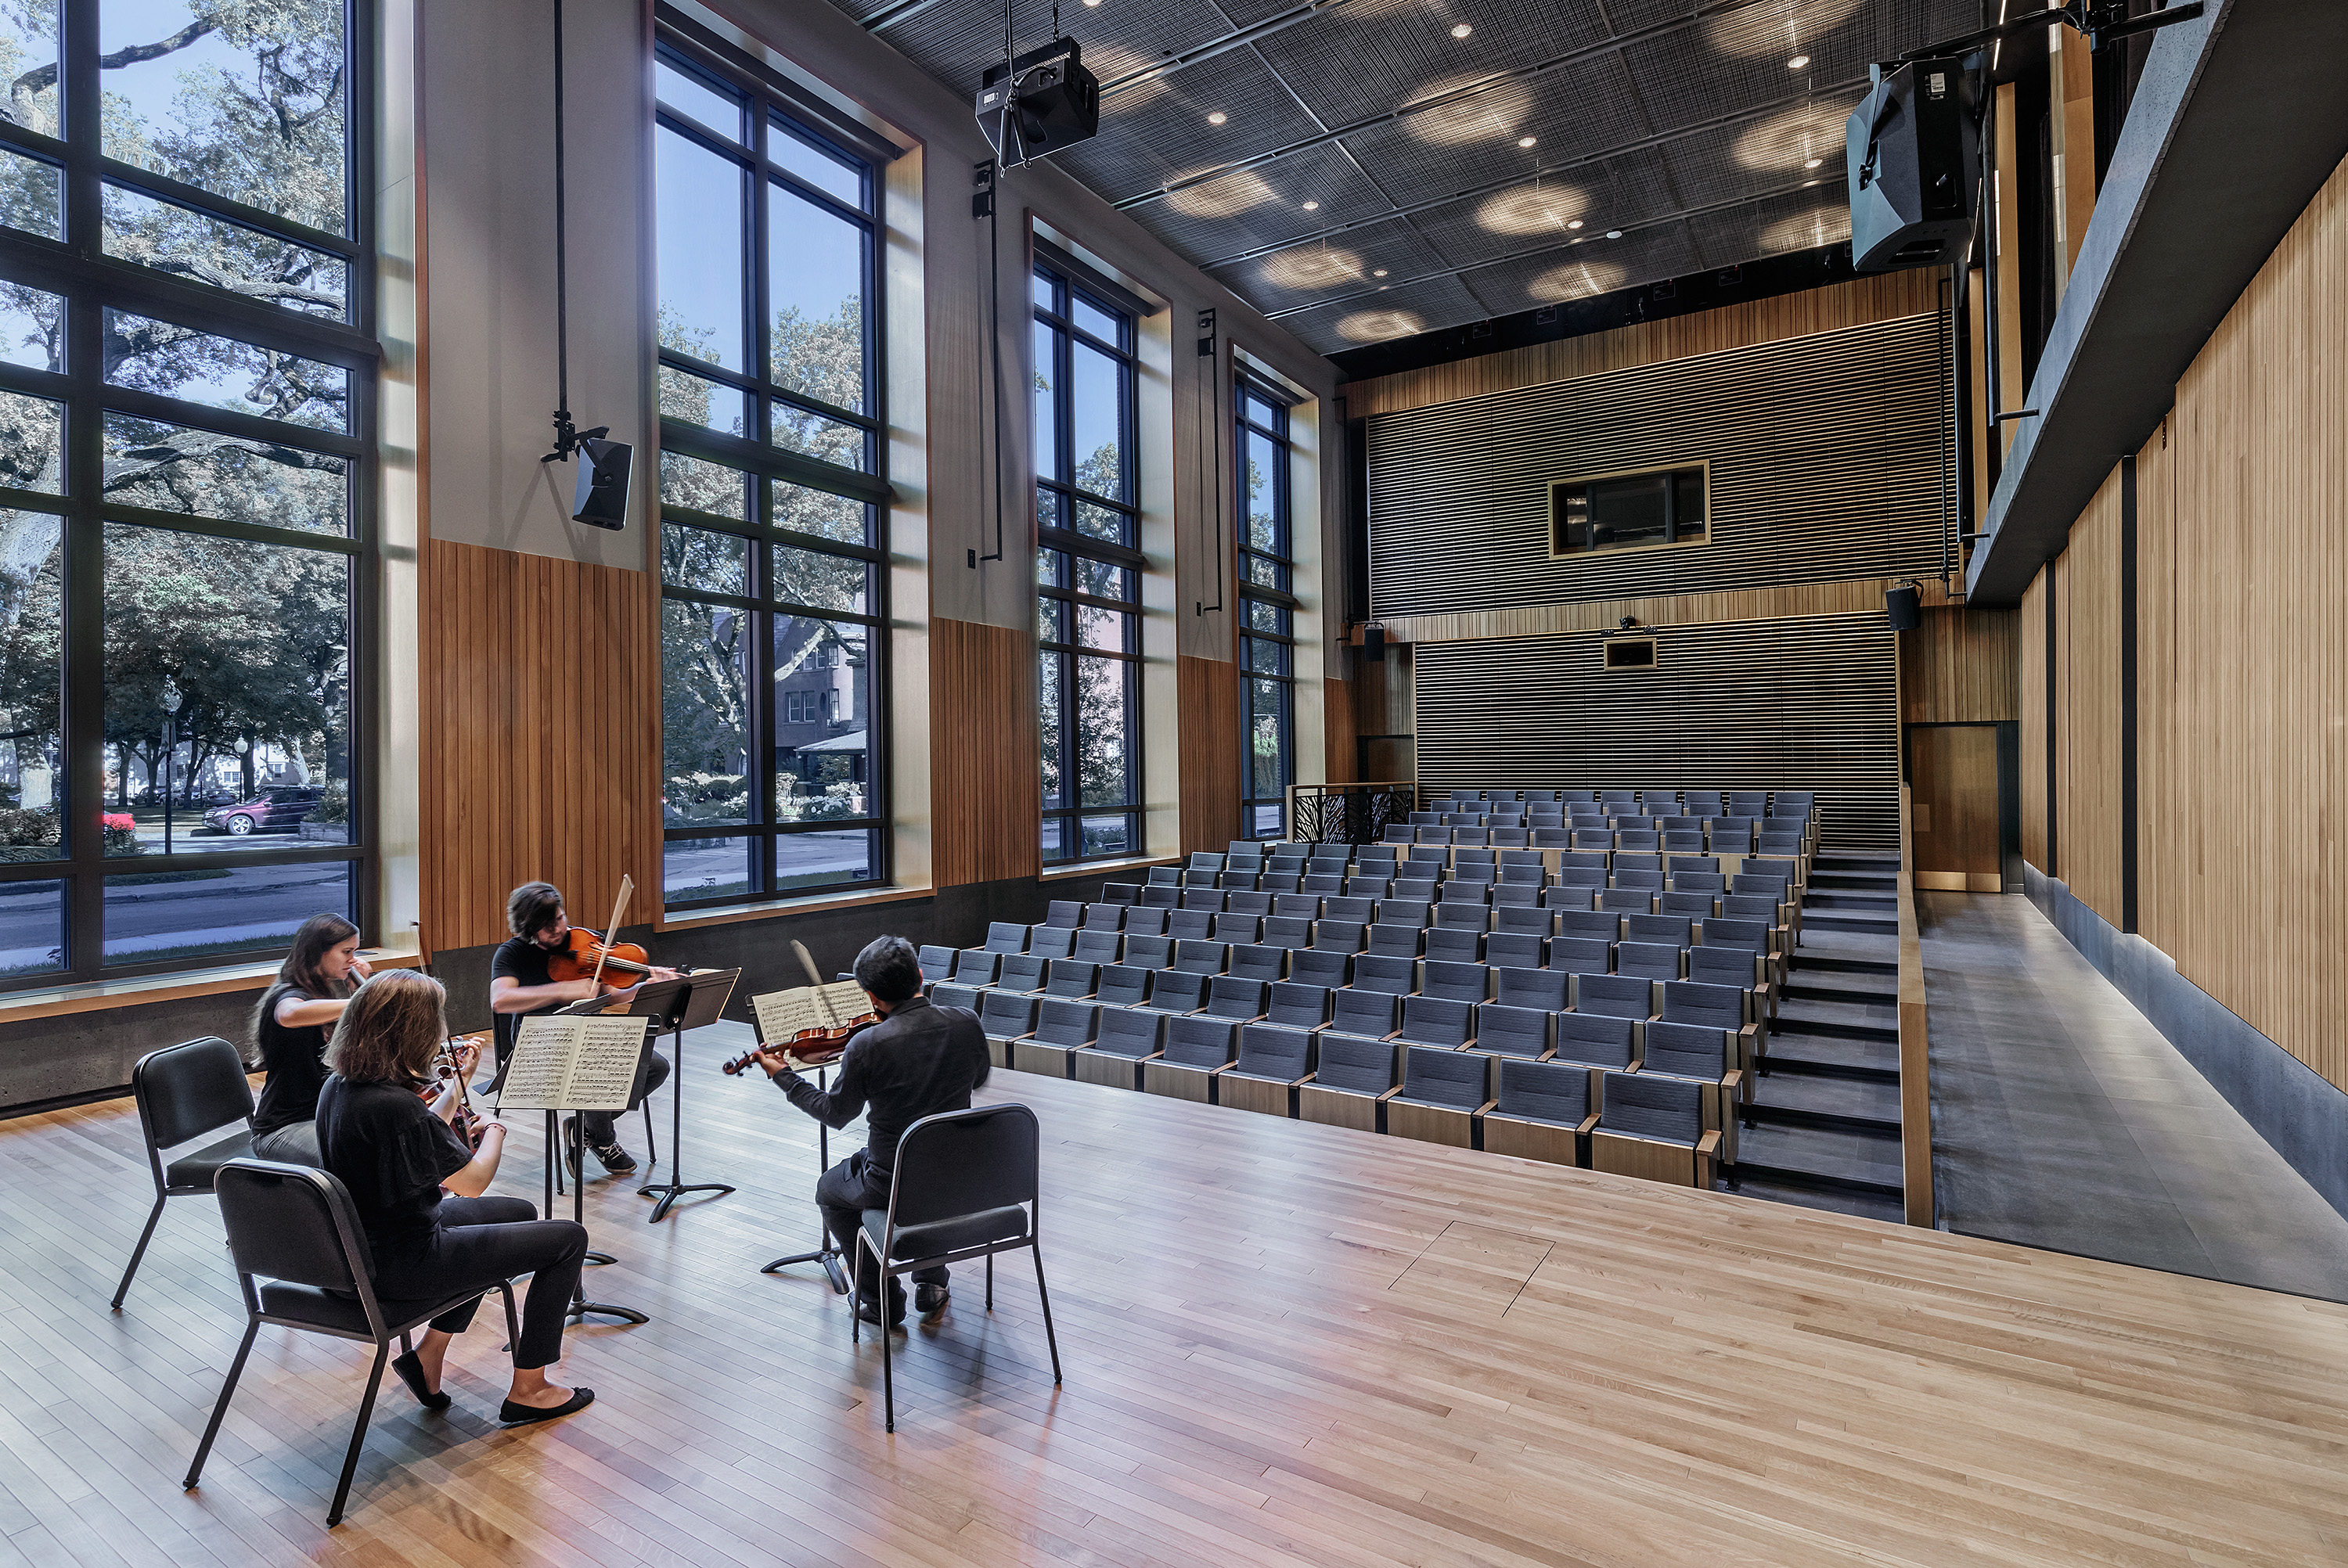 The 140-seat Murray and Michele Allen Recital Hall inside the DePaul University School of Music Holtschneider Performance Center